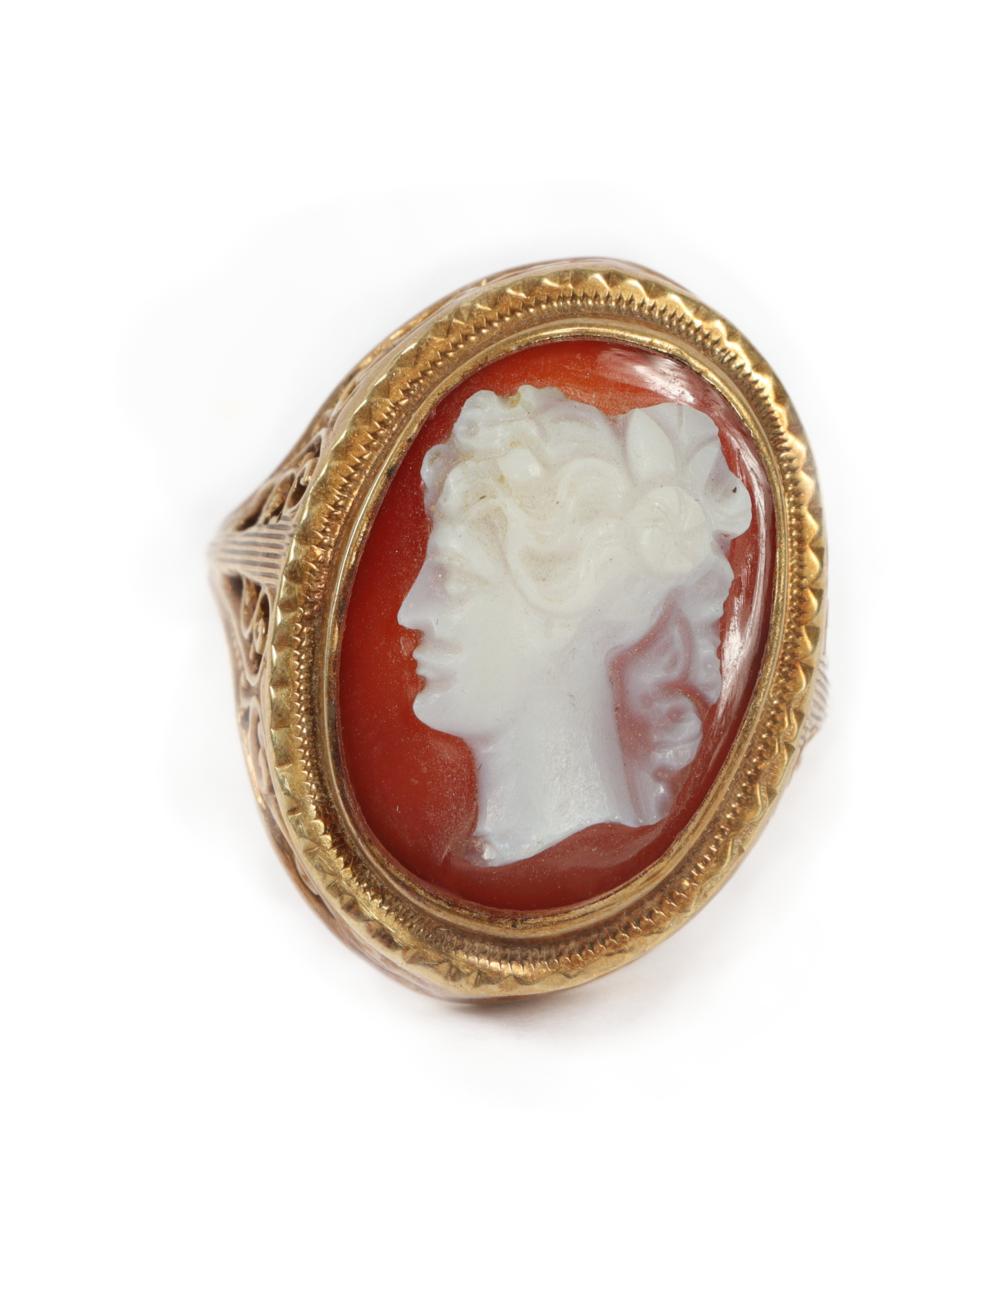 ANTIQUE VICTORIAN 14K GOLD CAMEO RING.